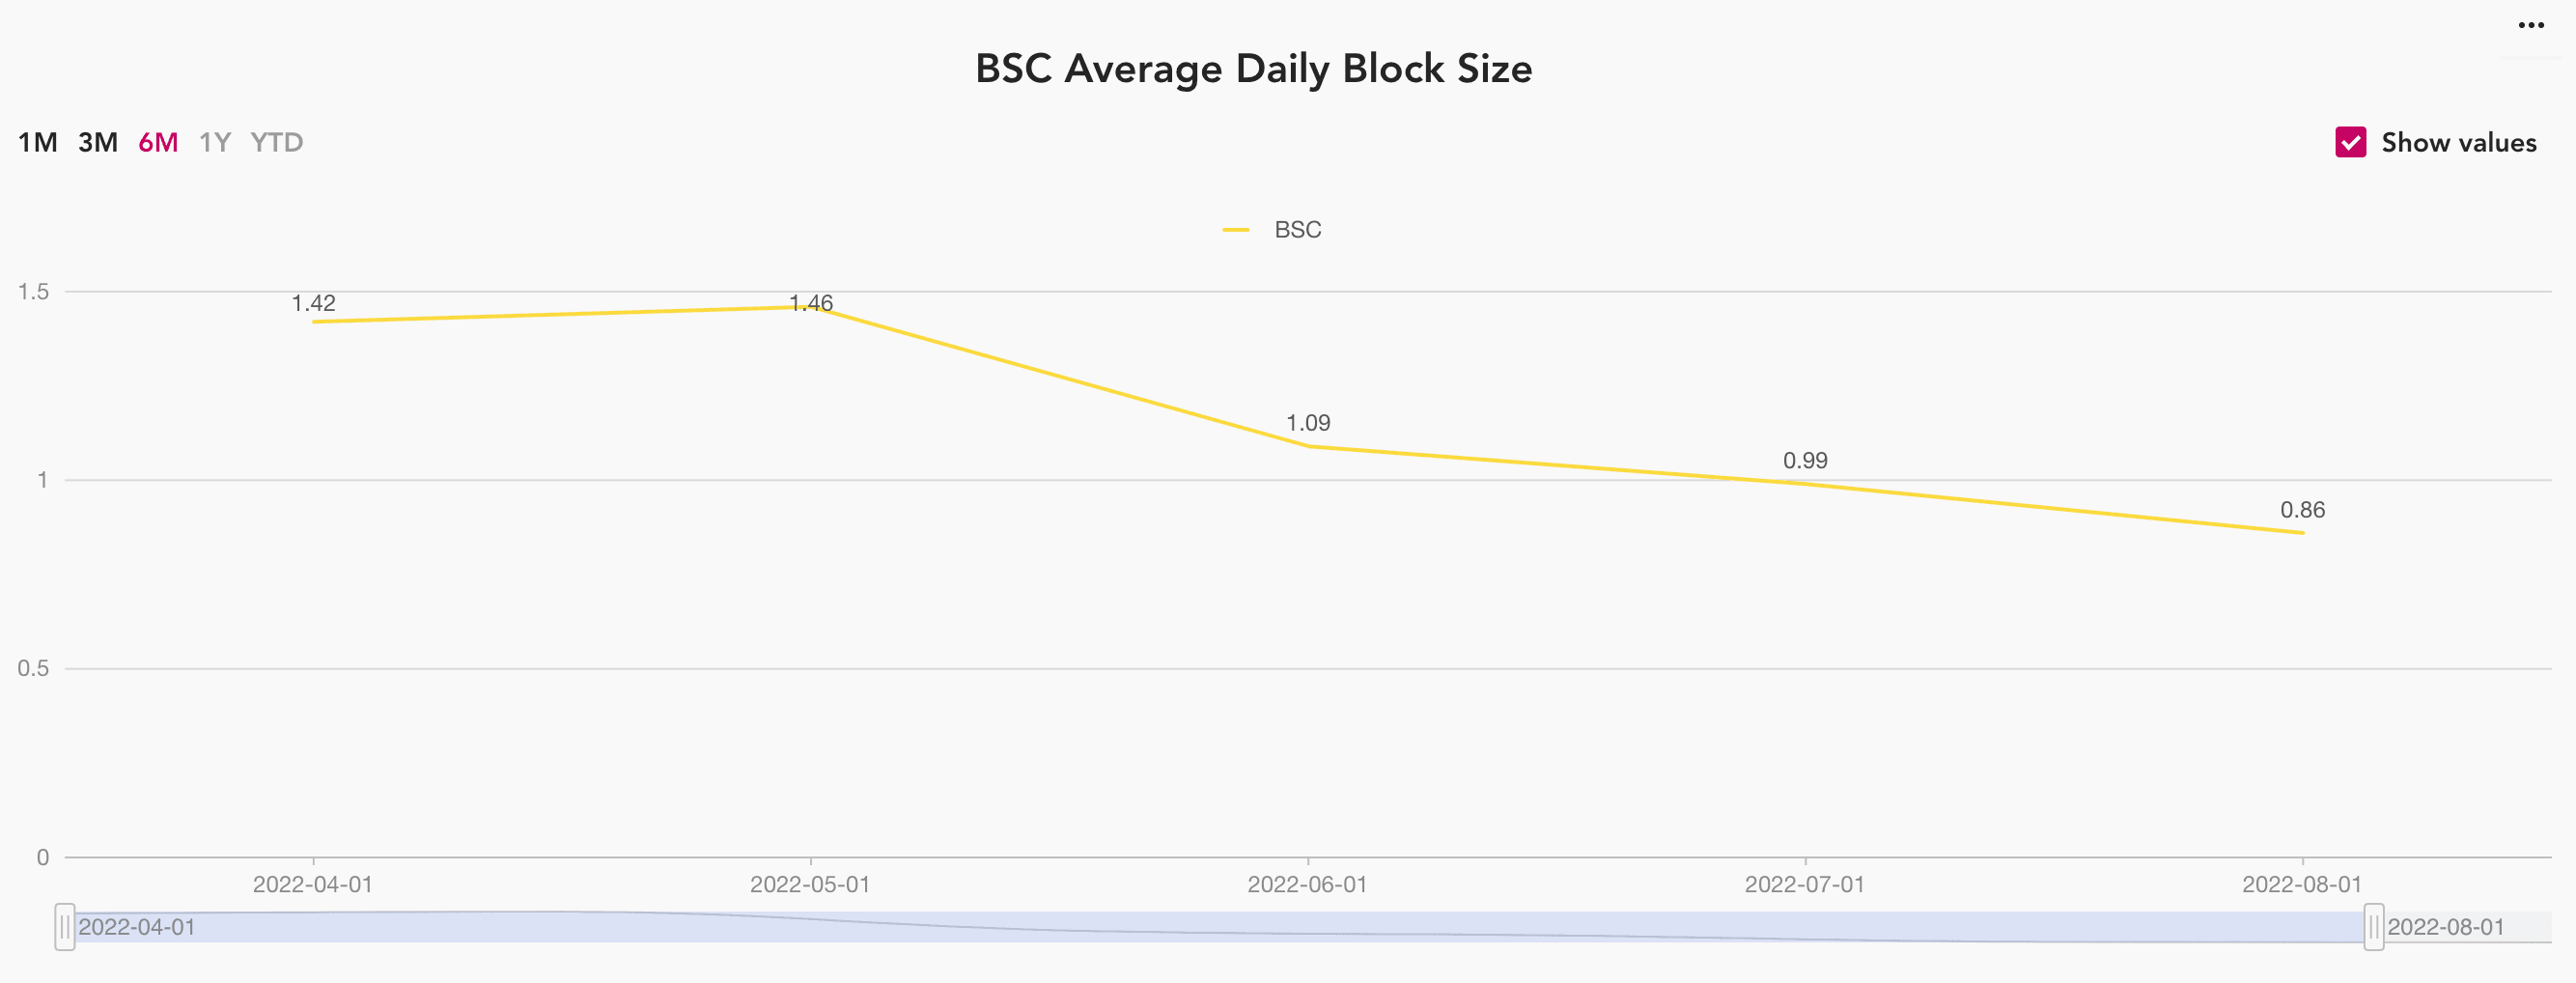 BSC average daily block size